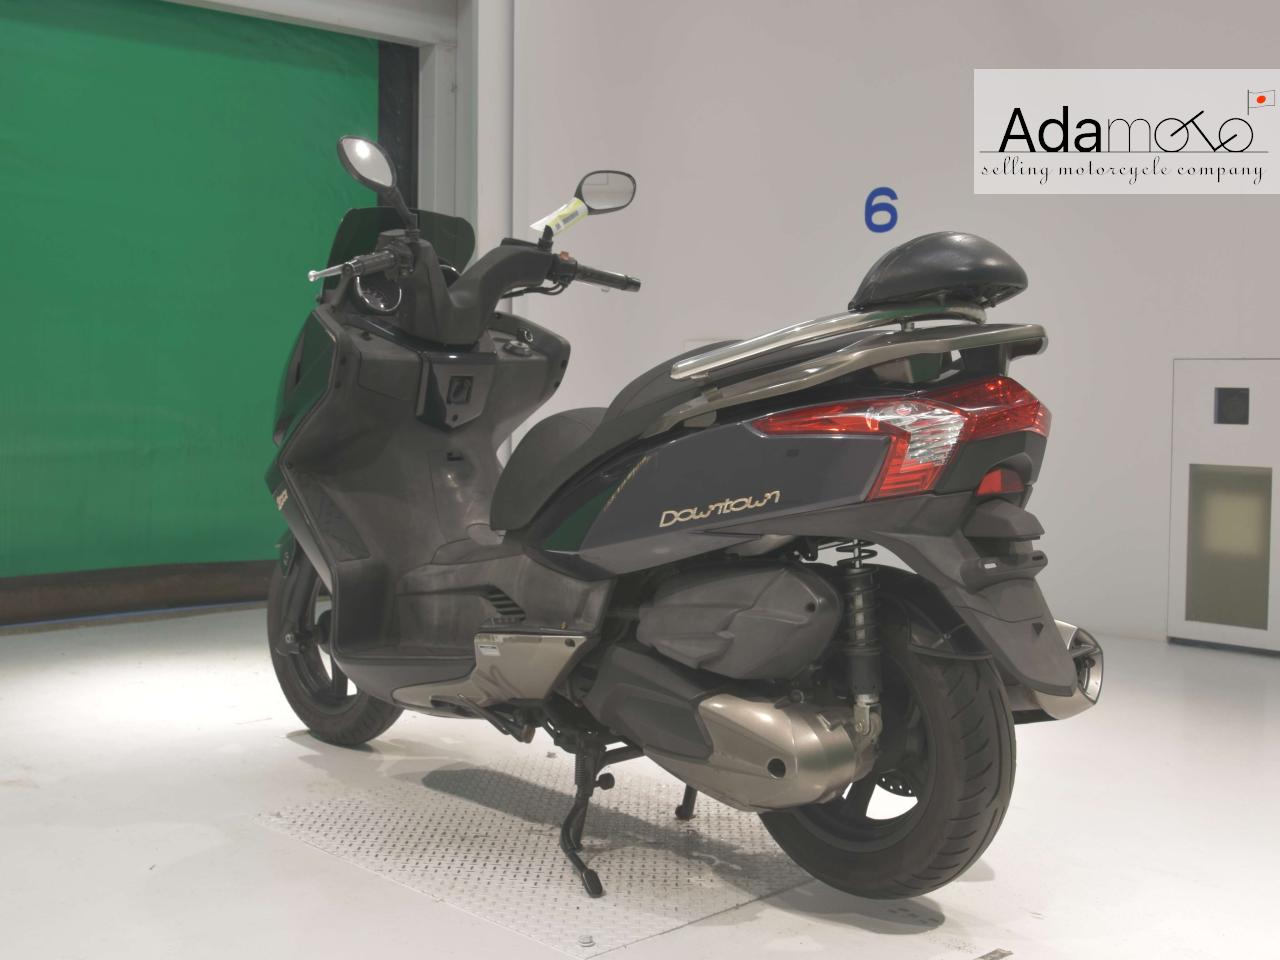 Kymco Downtown 200I - Adamoto - Motorcycles from Japan